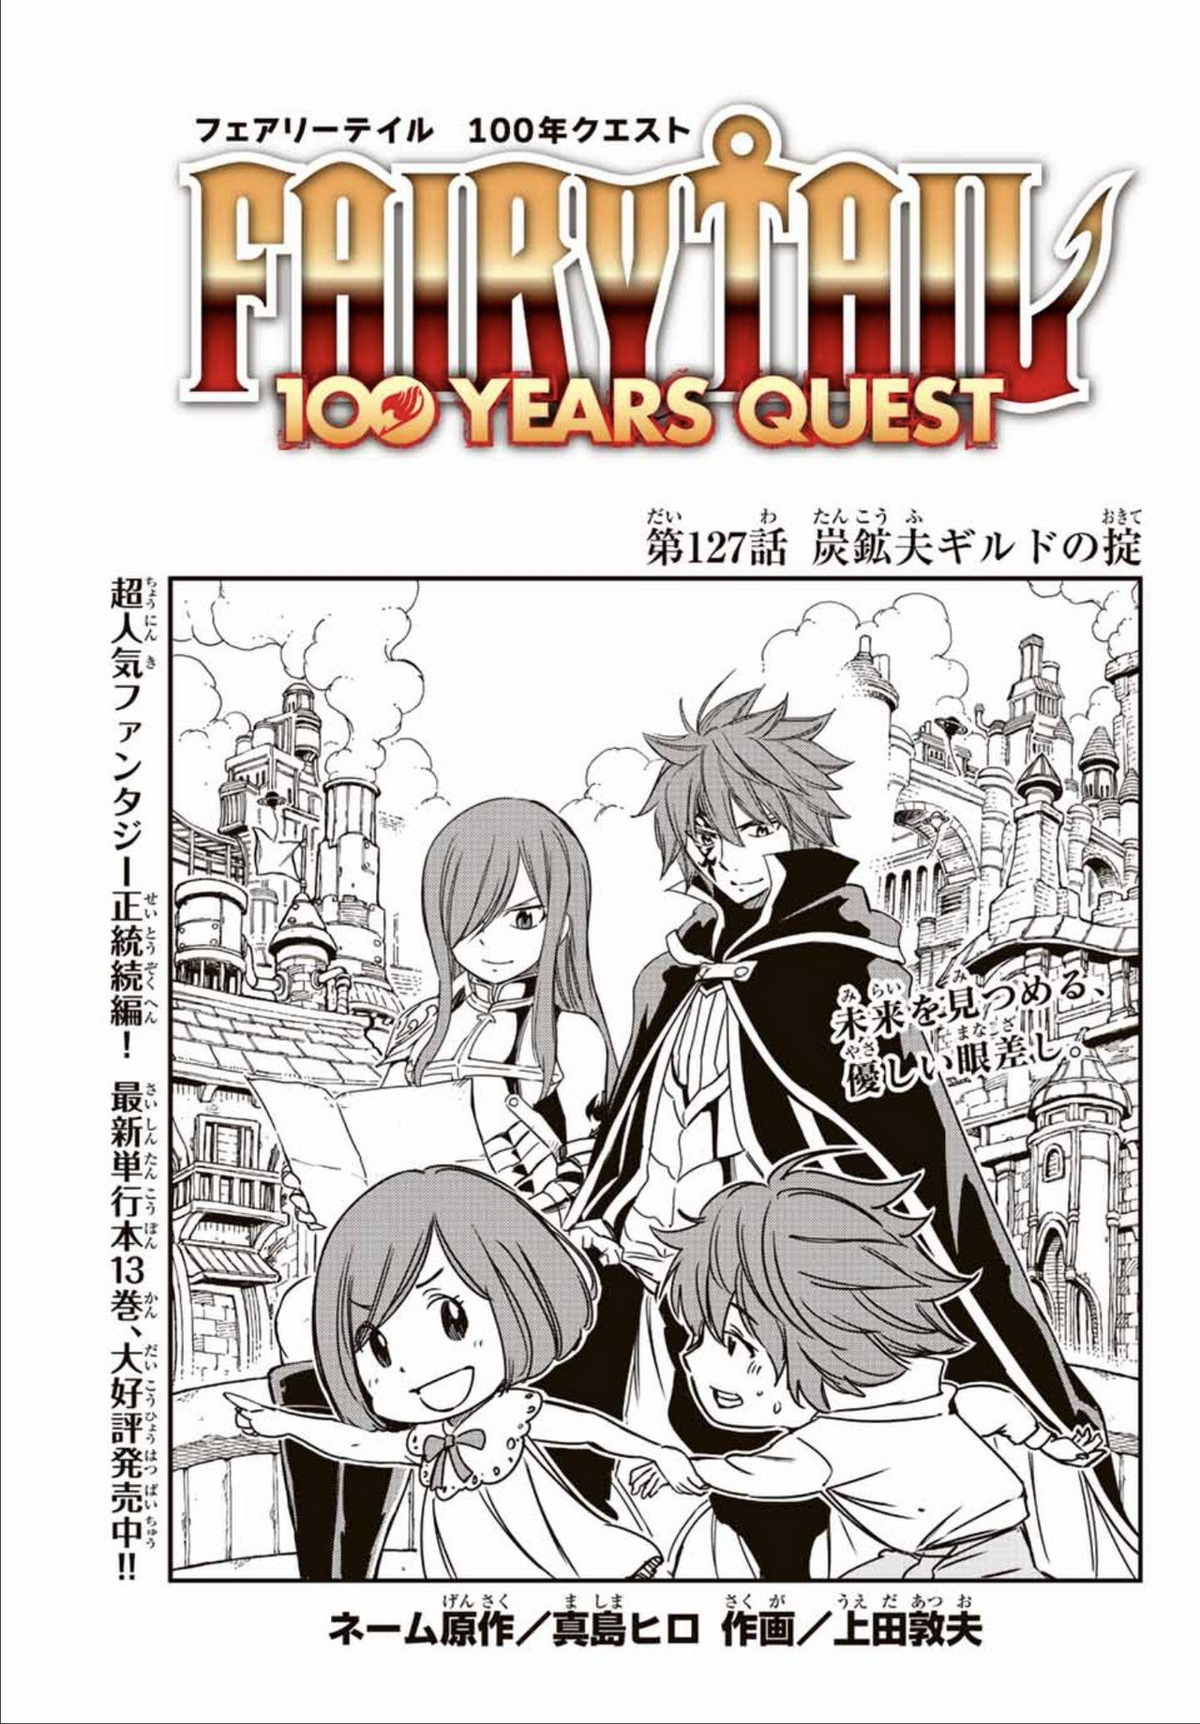 Fairy Tail: 100 Years Quest Chapter 2, Fairy Tail Wiki